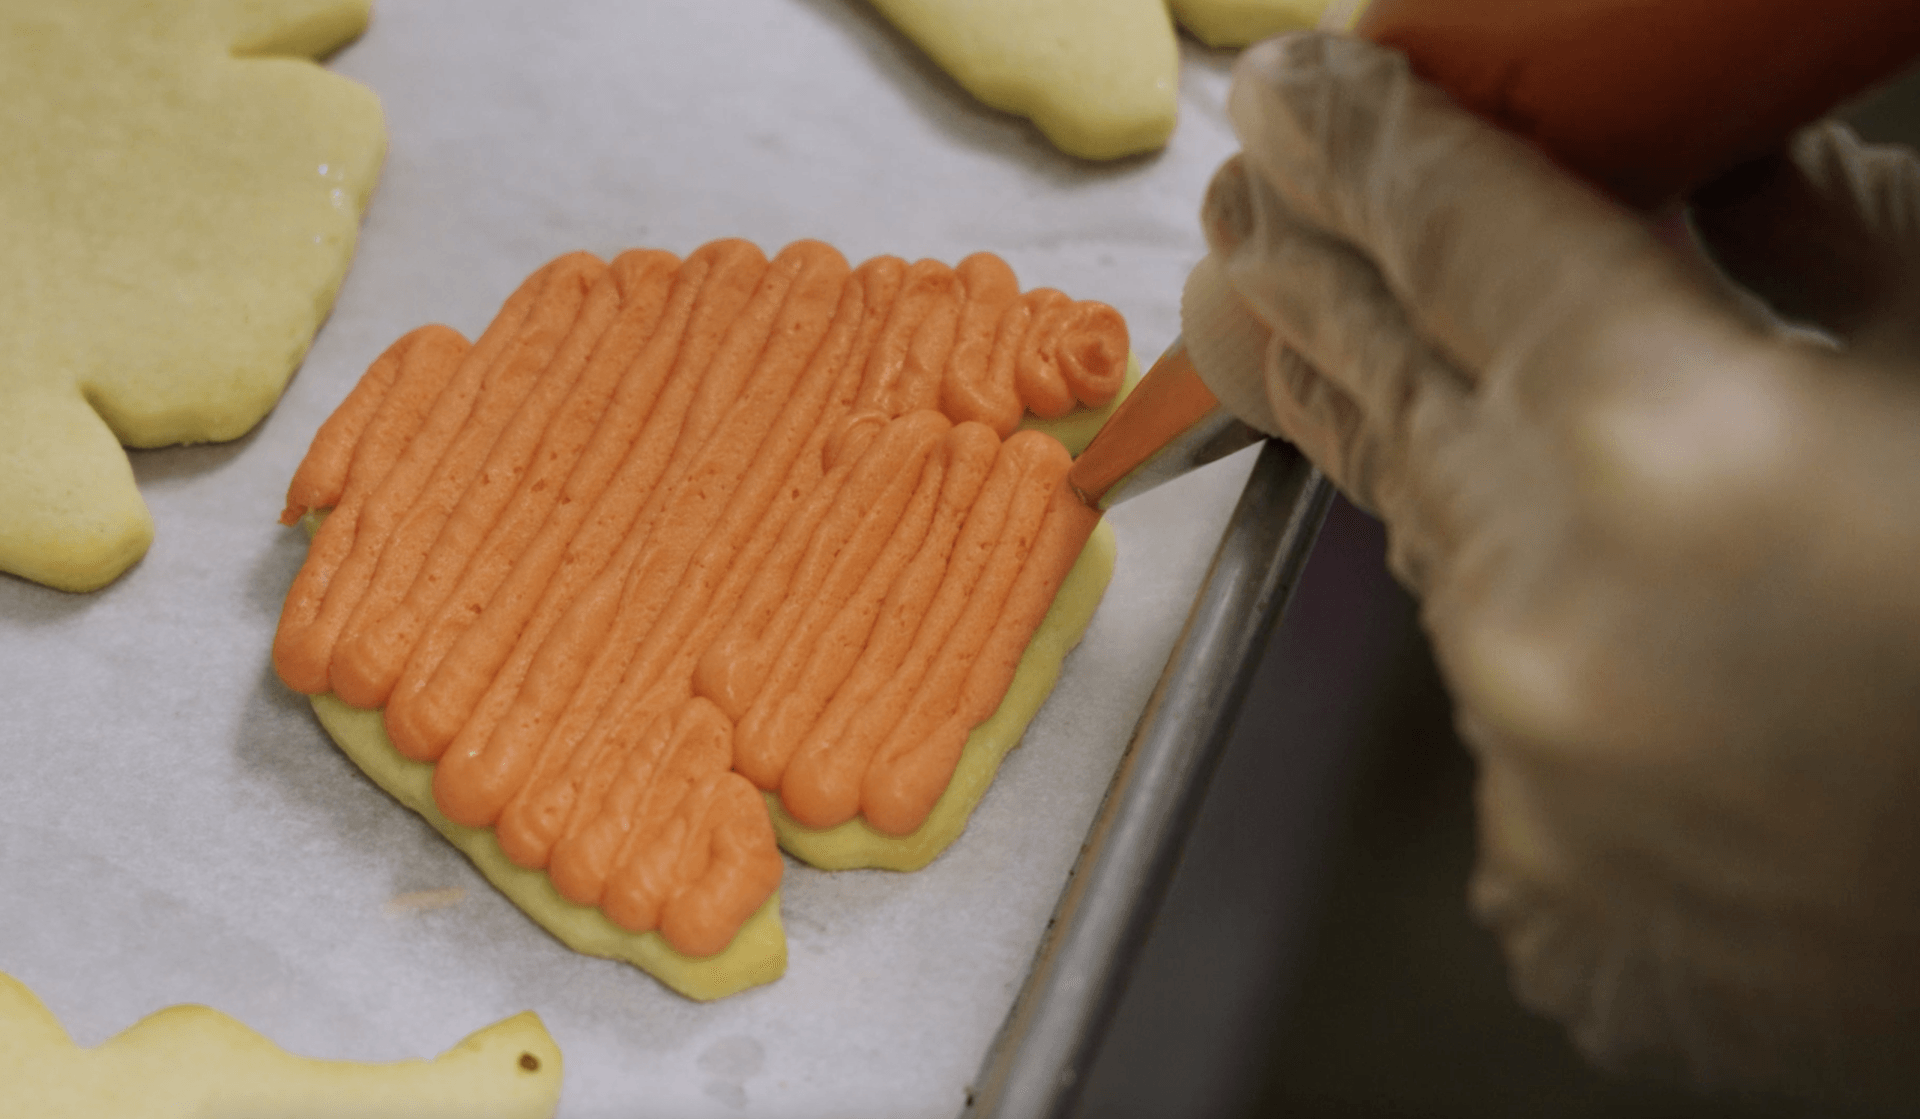 A gloved hand puts orange icing on a cookie